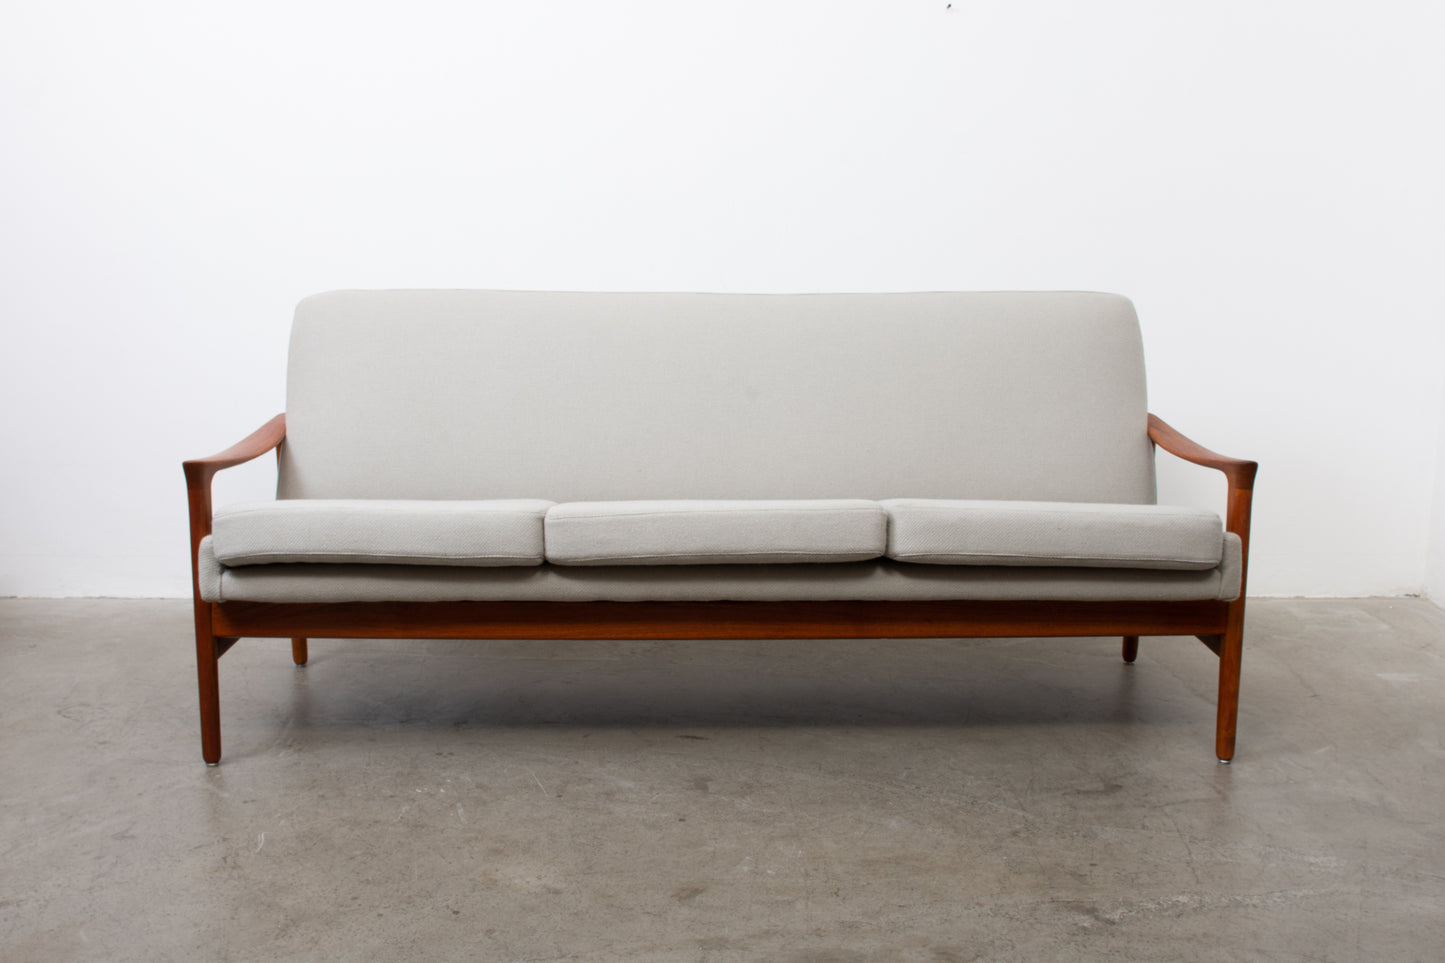 Newly reupholstered: 1960s 'Oslo' sofa by Inge Andersson